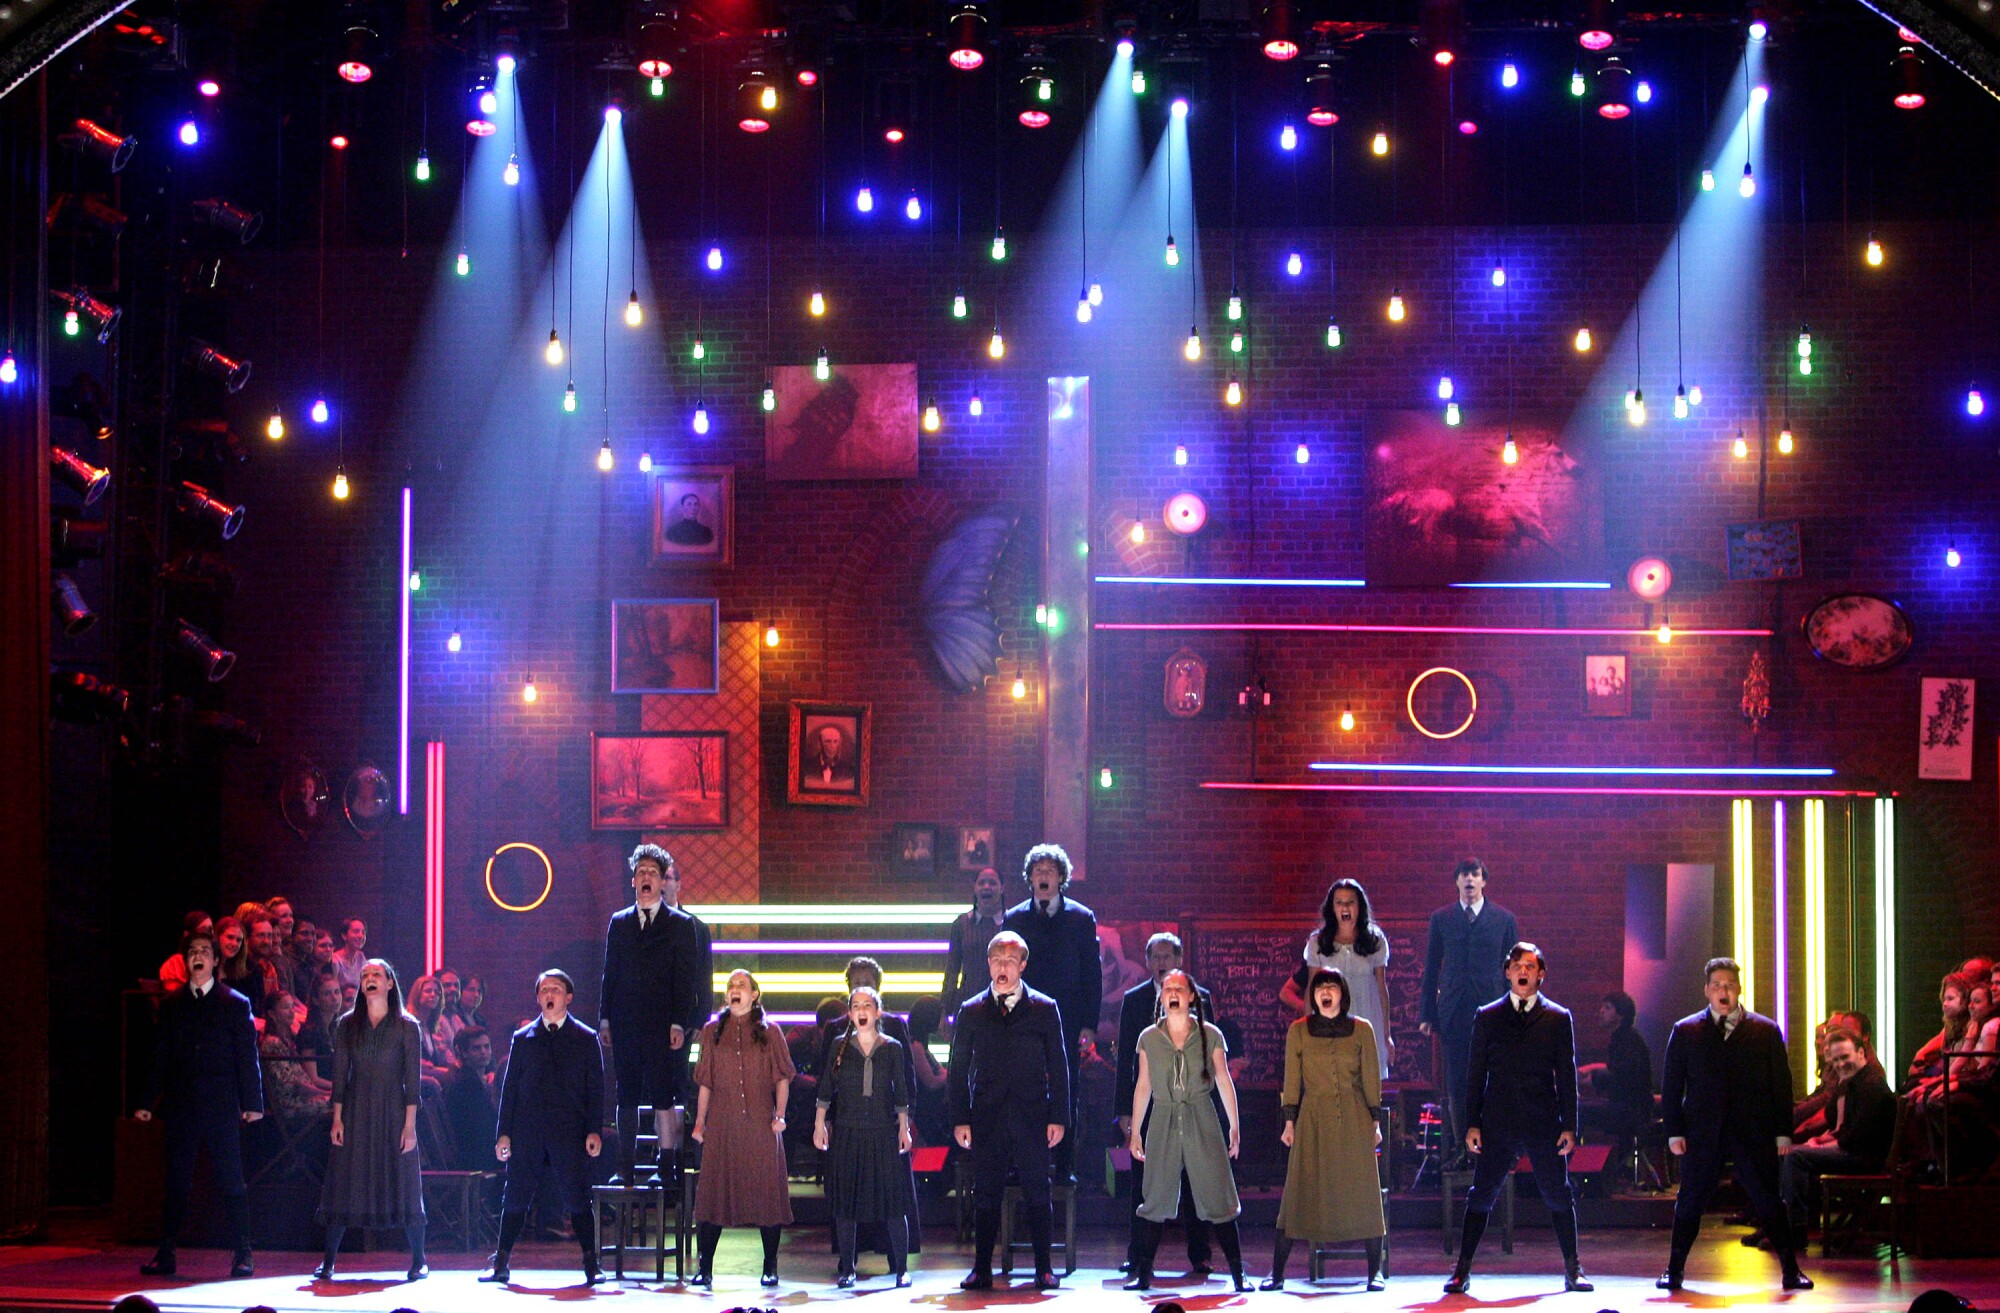 The cast of "Spring Awakening" perform onstage at the 61st Tony Awards at Radio City Music Hall on June 10, 2007.